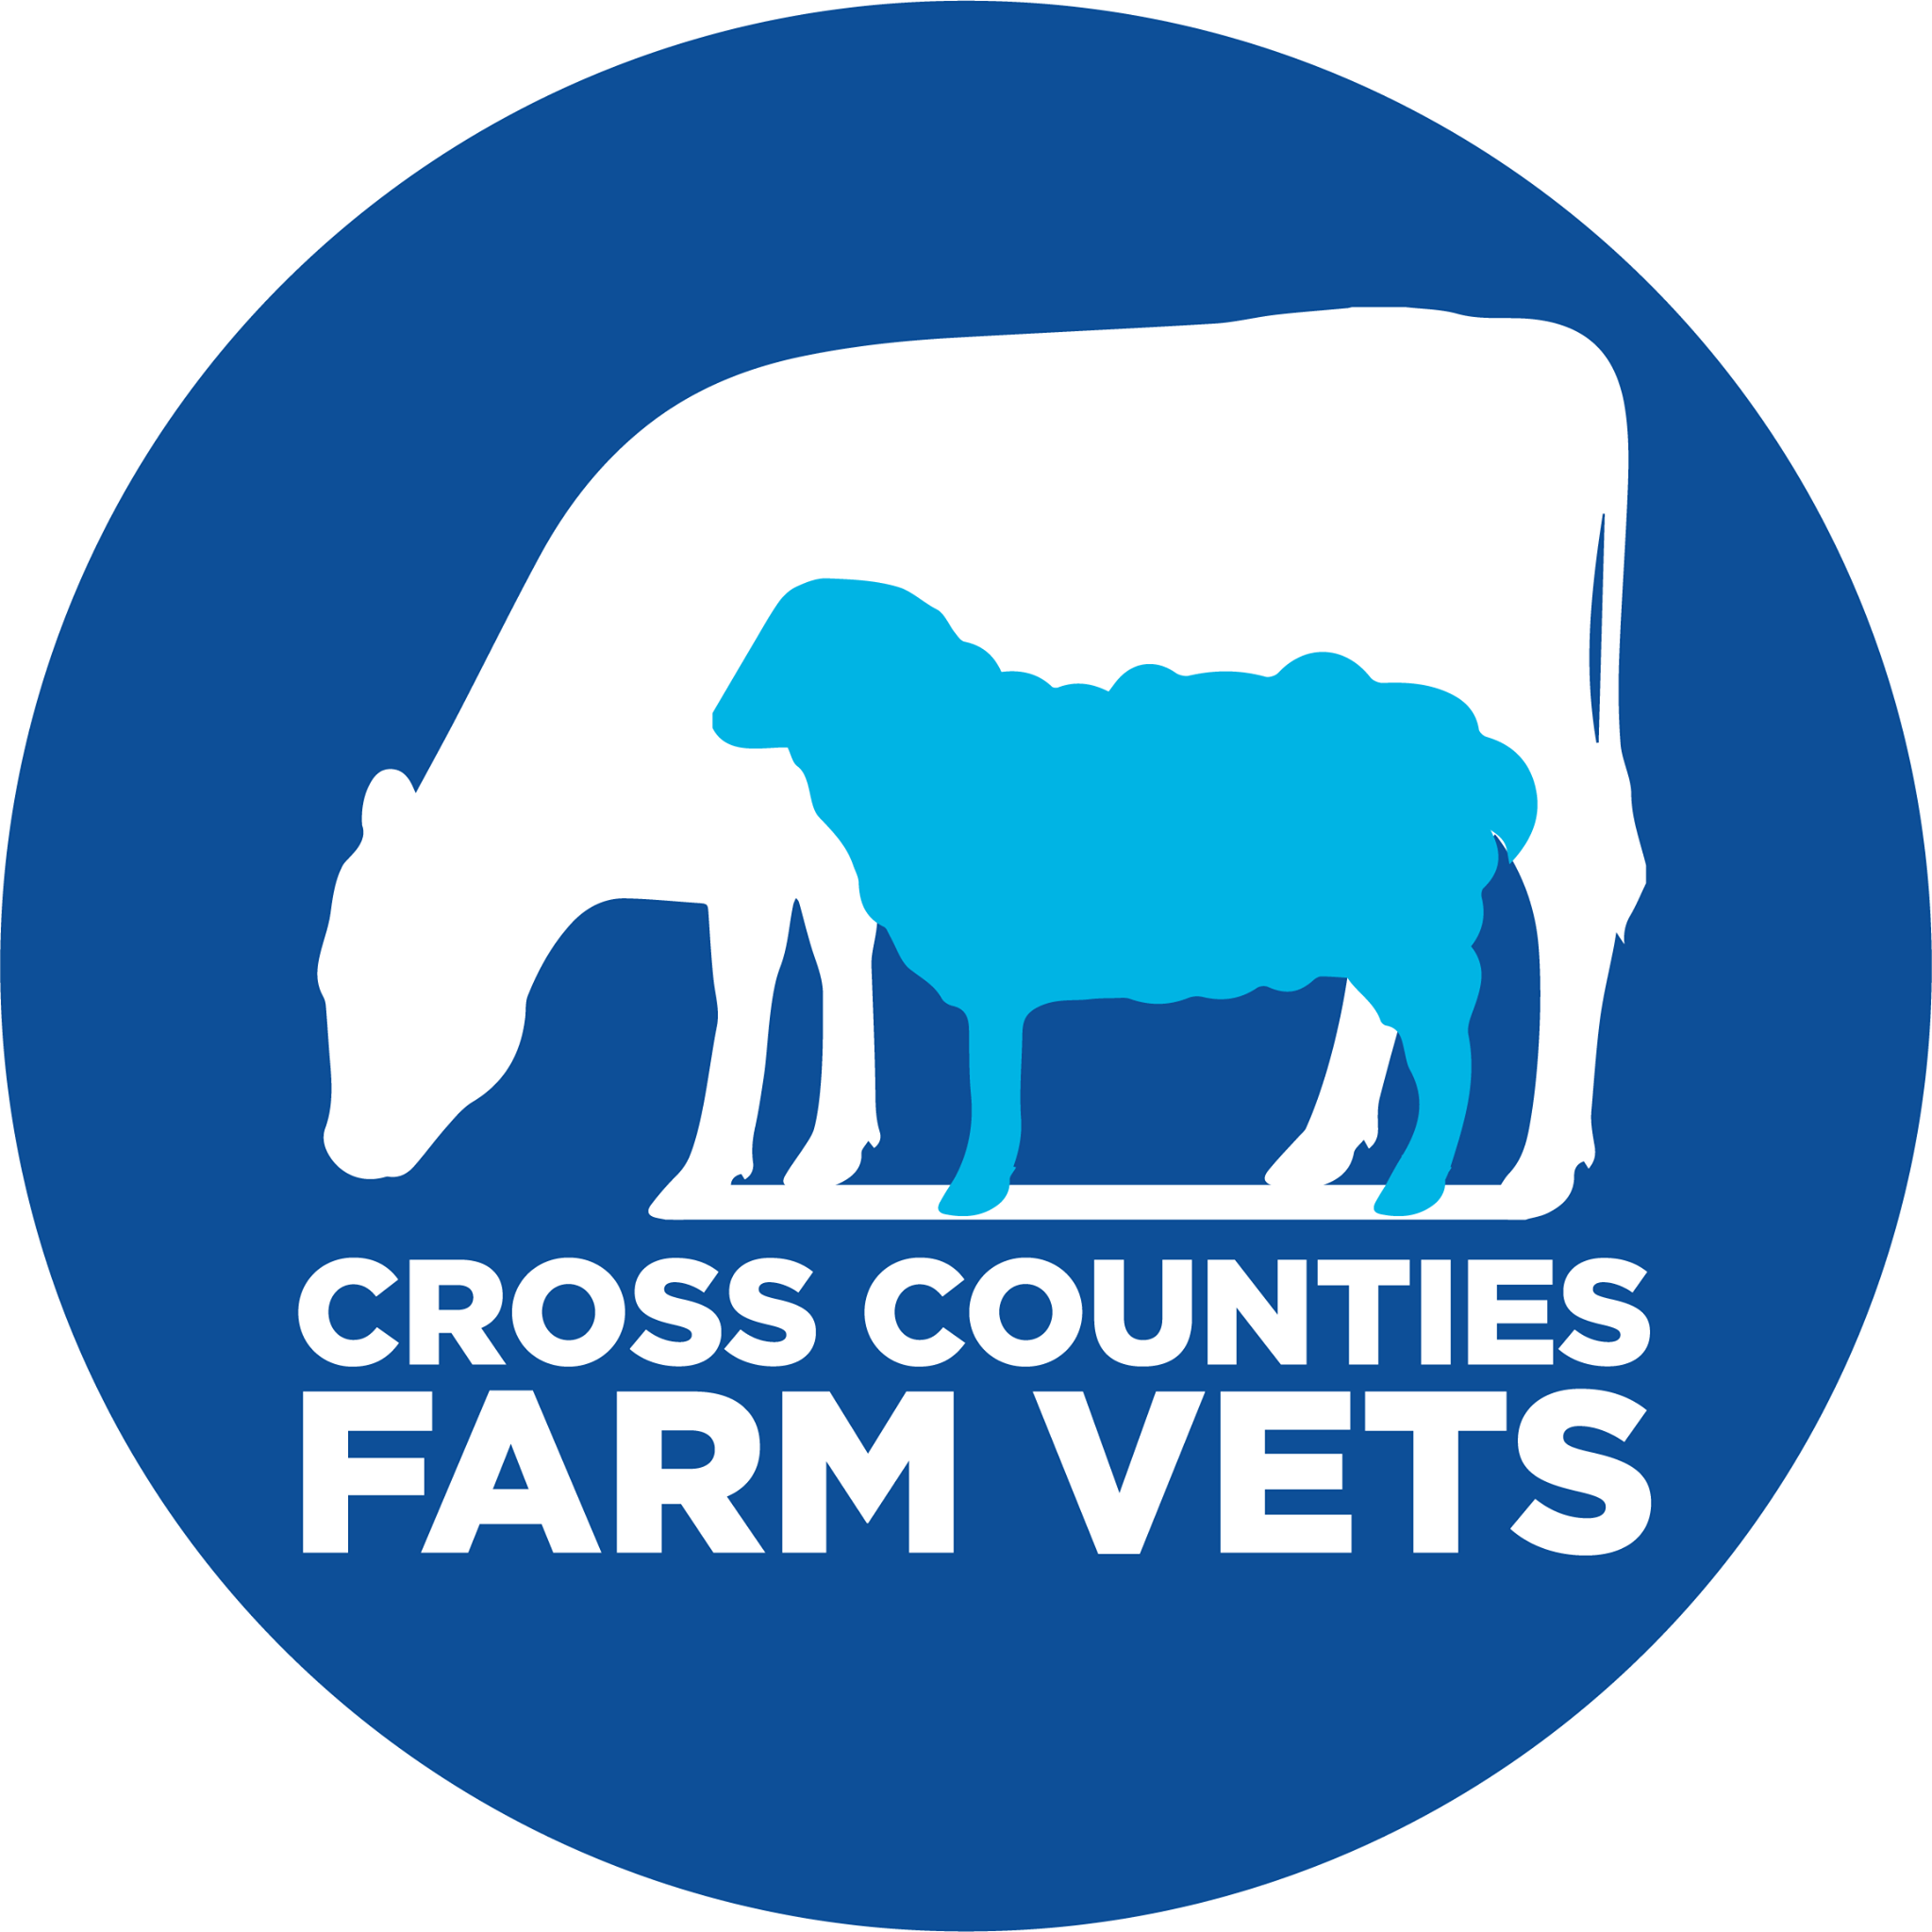 Cross Counties Farm Vets - Broughton Astley - Leicester, Leicestershire LE9 6TU - 01455 710935 | ShowMeLocal.com